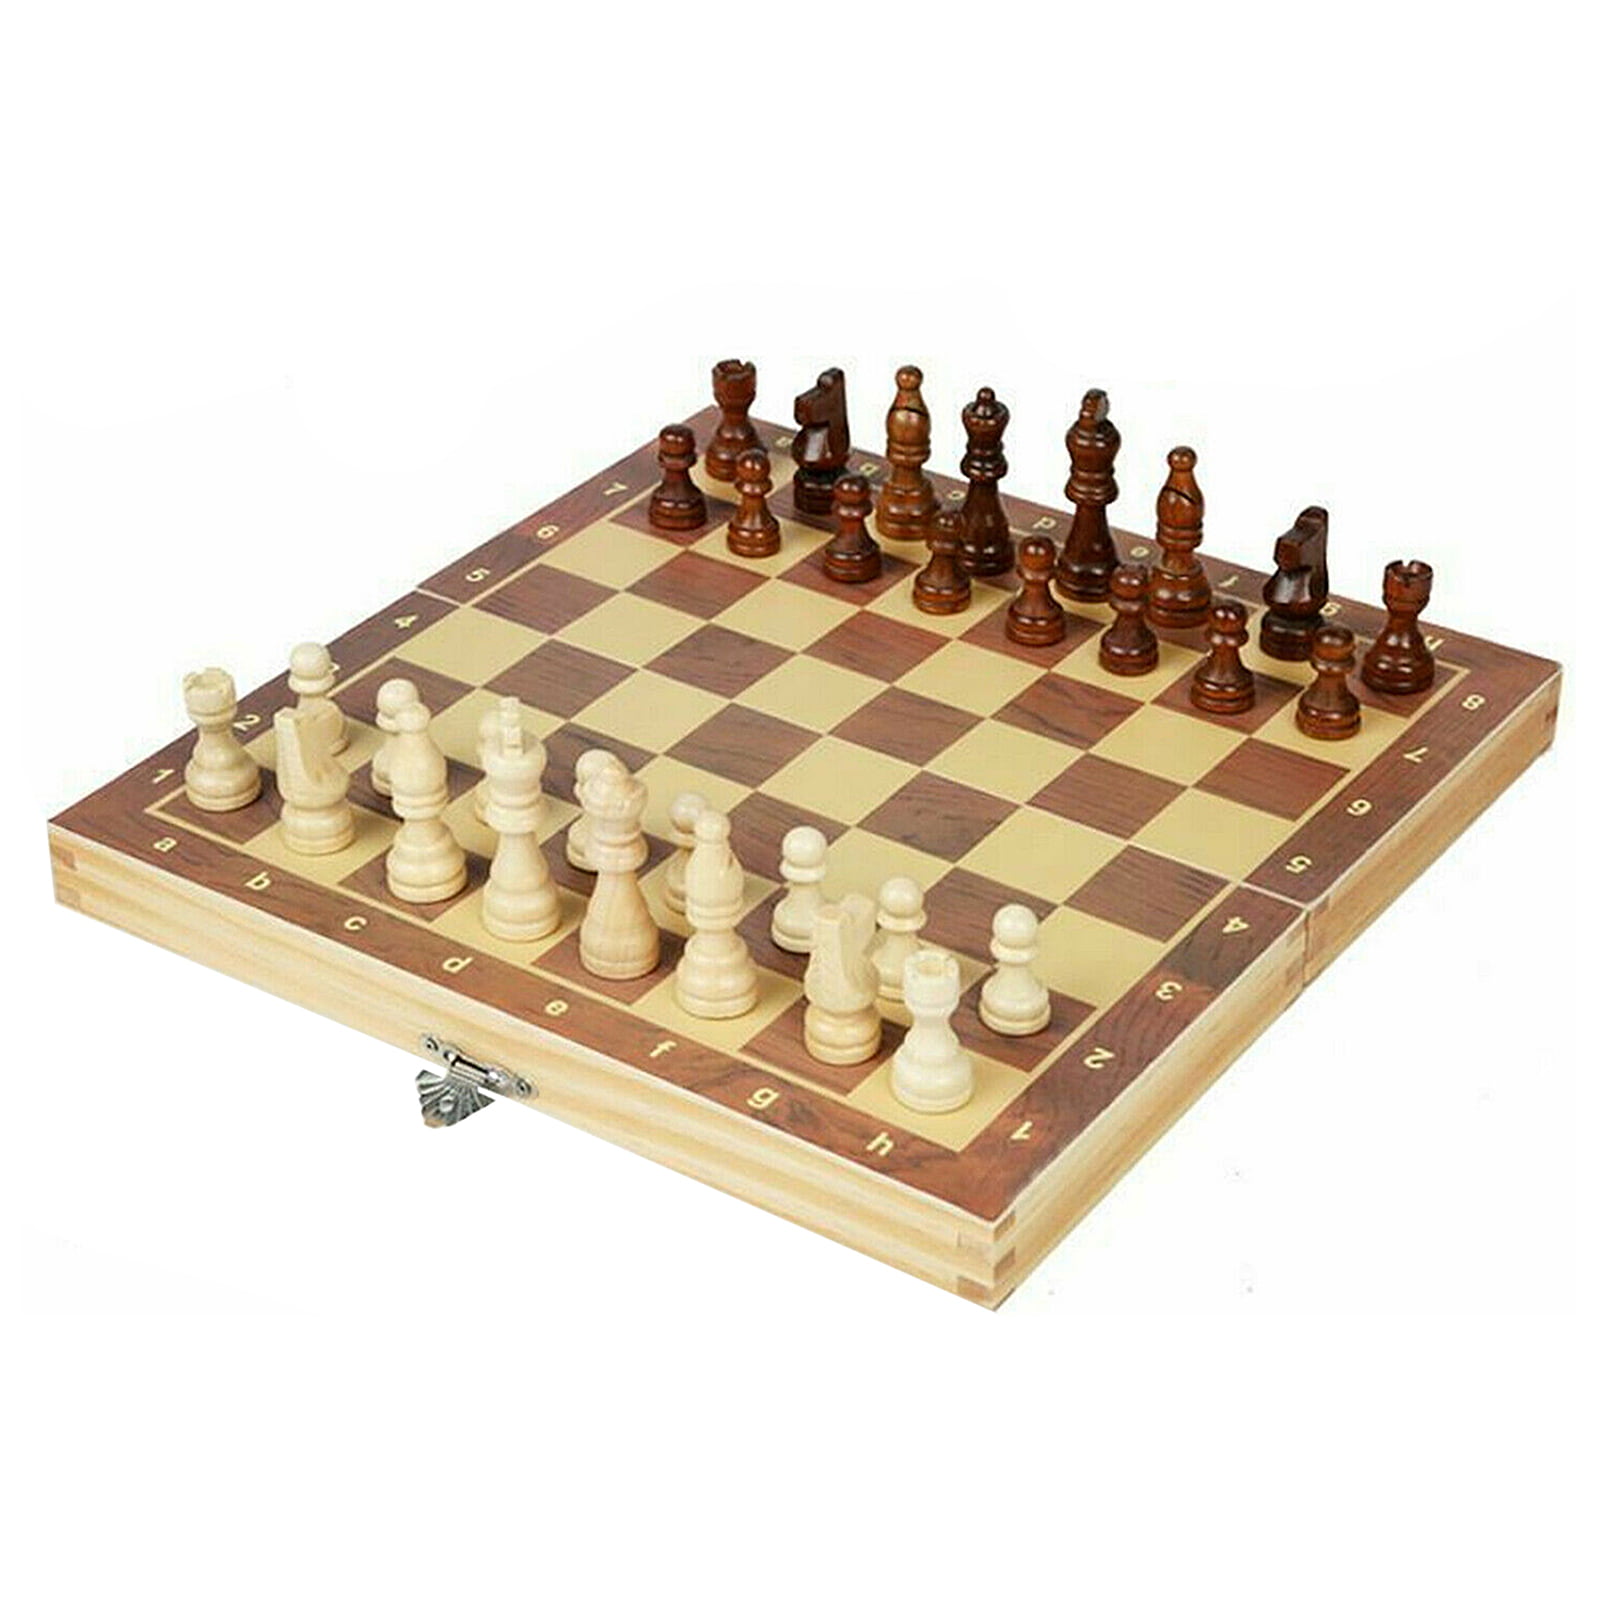 New Large Chess Wooden Set Folding Chessboard Magnetic Pieces Board Wood V9R6 